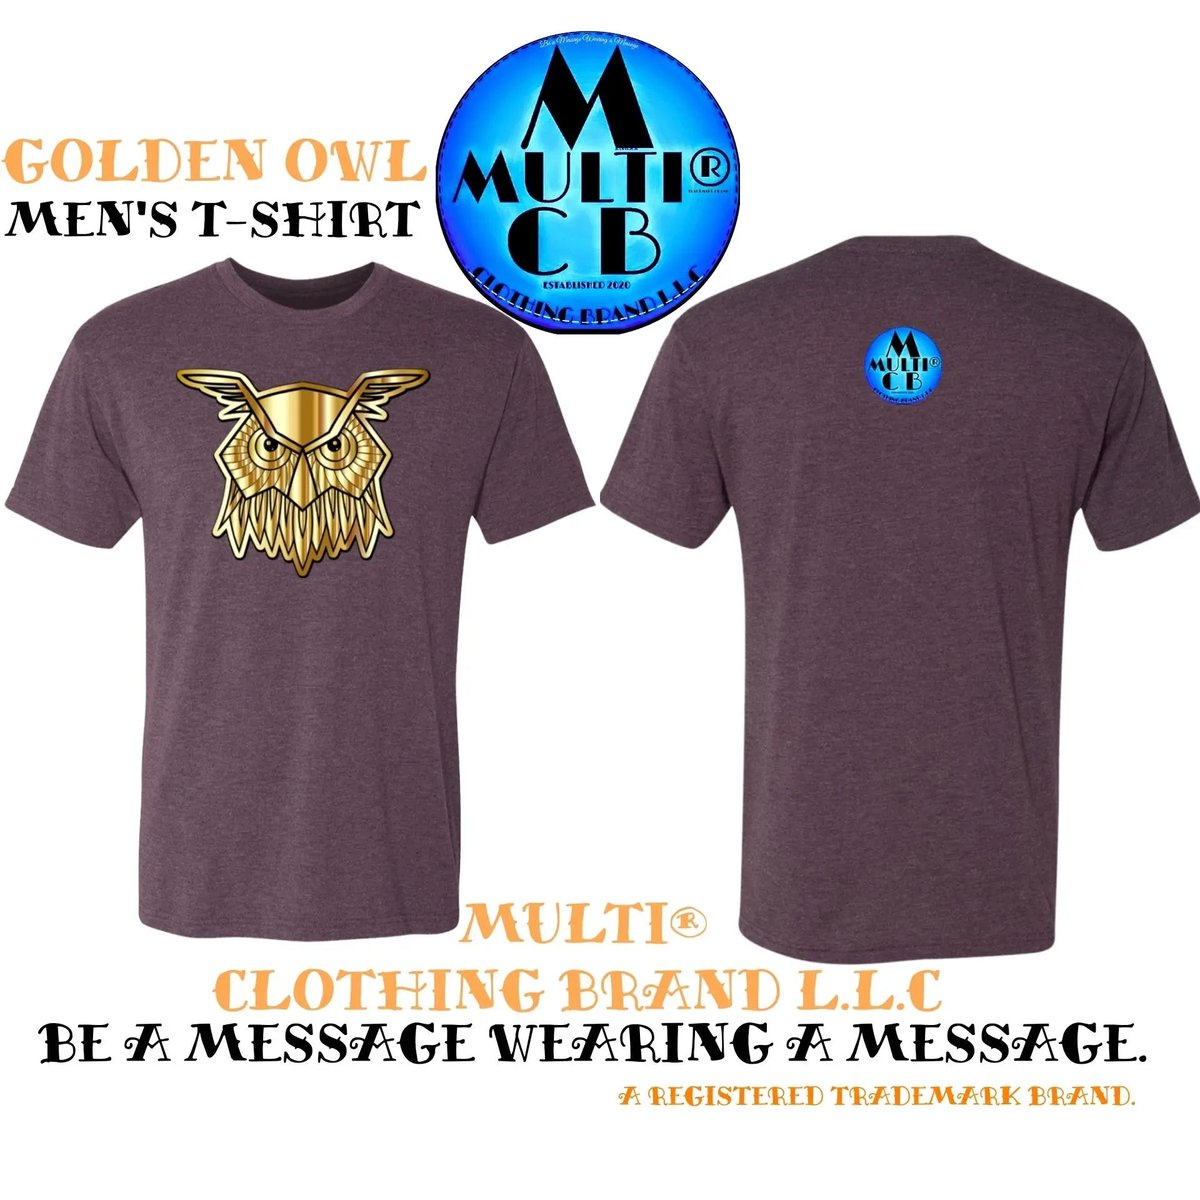 Golden Owl Men's Vintage Triblend T-Shirt Clothing – Multi Clothing Brand L L C®
multiclothingbrand.com/products/golde…
#clothingbrand #clothingline #clothingstore #clothingcompany #sustainable #affordable #premium #clothings #ethical #streetclothing #streetwear #multi